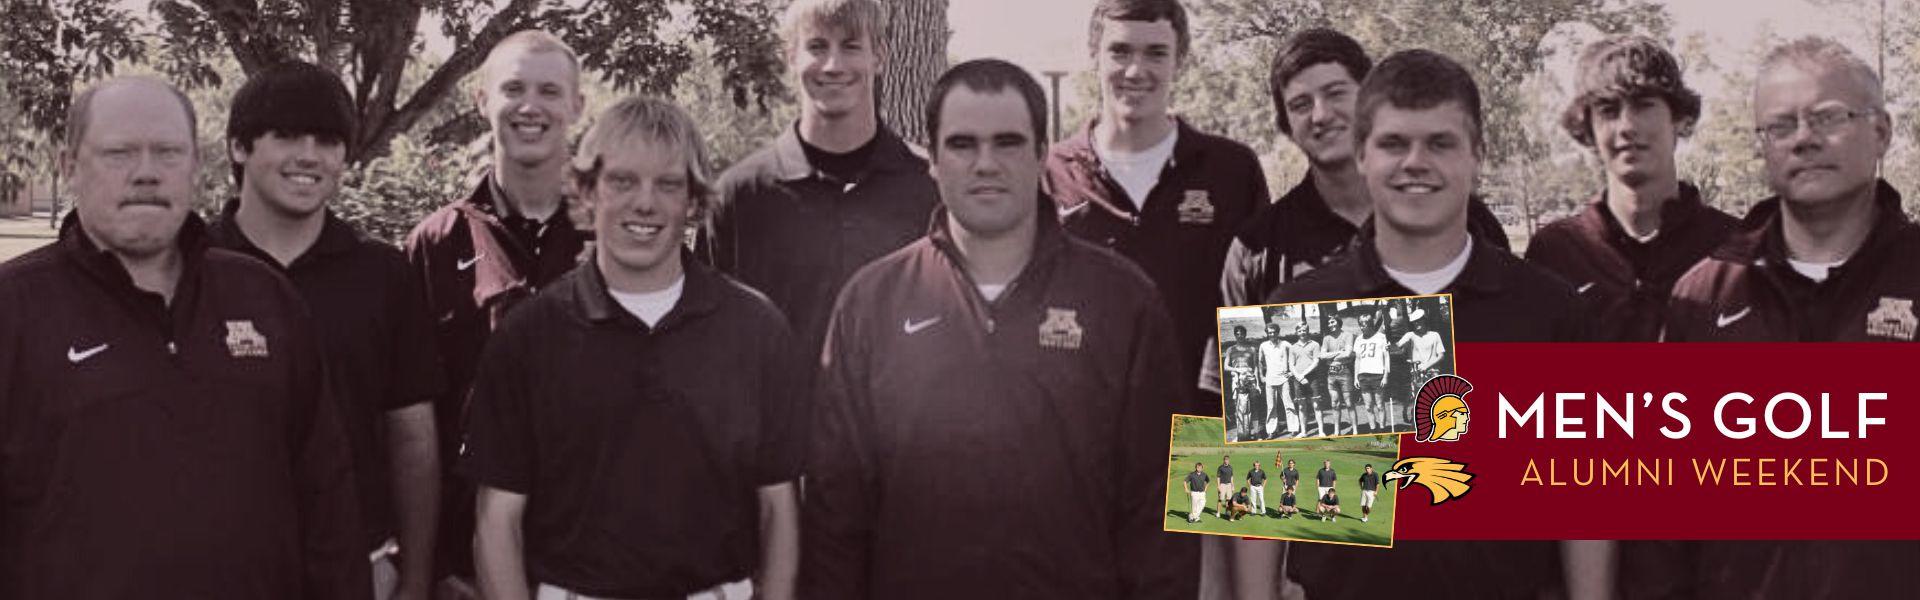 Men's Golf Alumni Weekend collage of photos from current Golden Eagle golf teams to Trojan era golf teams